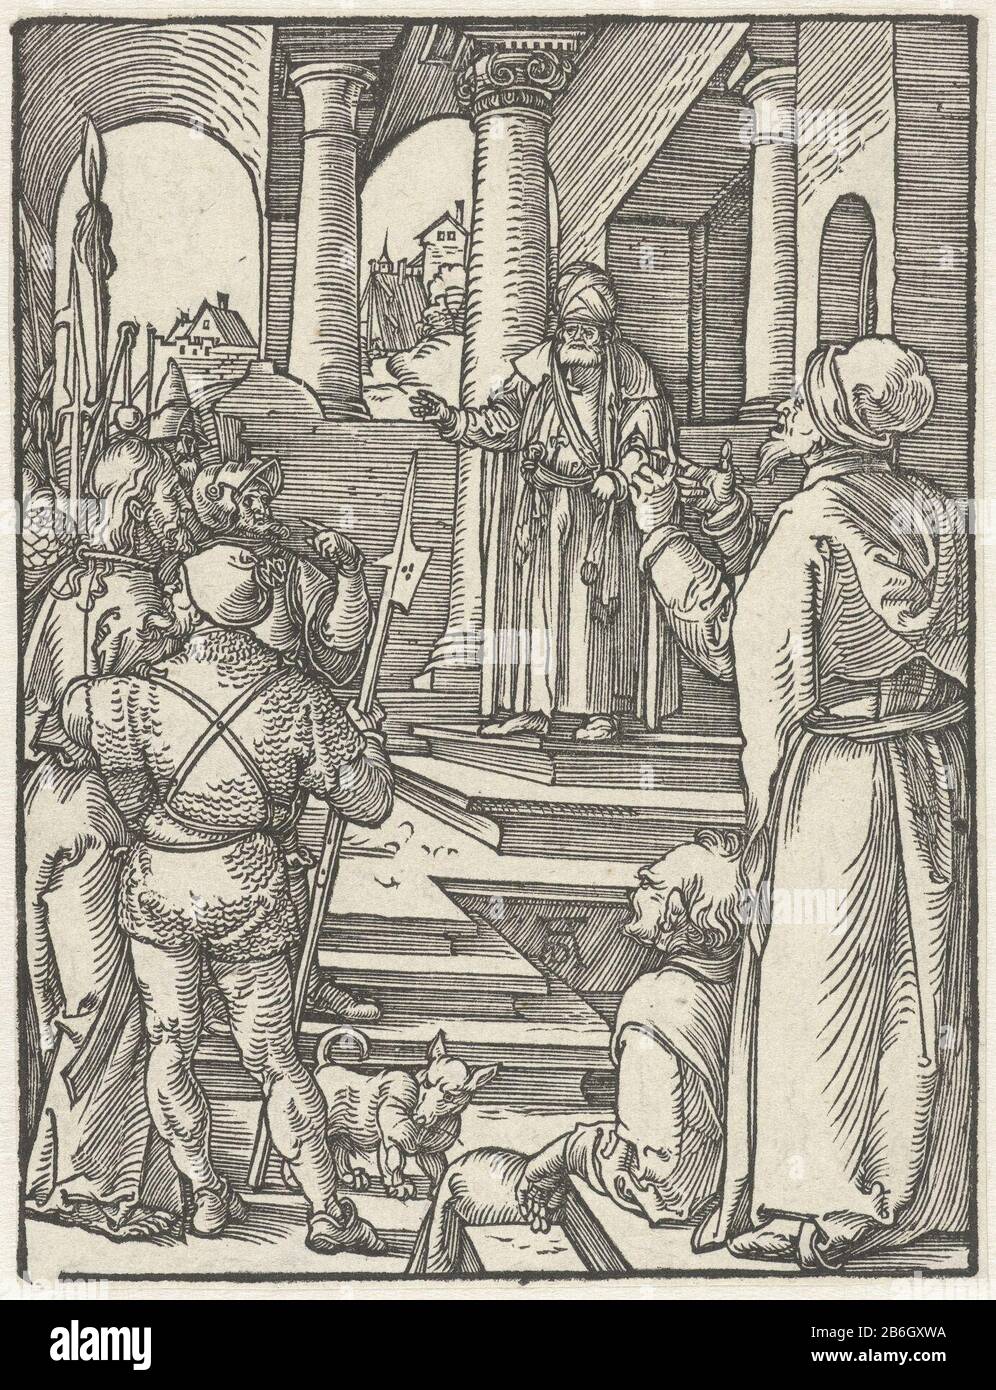 Christ before Pilate Small Passion (series title) Christ led by armed men before Pilate. This picture is part of the picture series 'Small Passion', consisting of a frontispiece and 36 biblical scenes (mostly from the Passion) . Manufacturer : printmaker Albrecht Dürer (listed property) Place manufacture: Nuremberg Date: 1508 - 1509 Physical features: woodcut material : paper Technique: wood block dimensions: image: h × 129 mm b 99 mm Subject: Christ before Pontius Pilate (Matthew 27: 11-26; Mark 15: 2-15; Luke 23: 2-7, 23: 13-25; John 18 : 28 - 19:16) Stock Photo